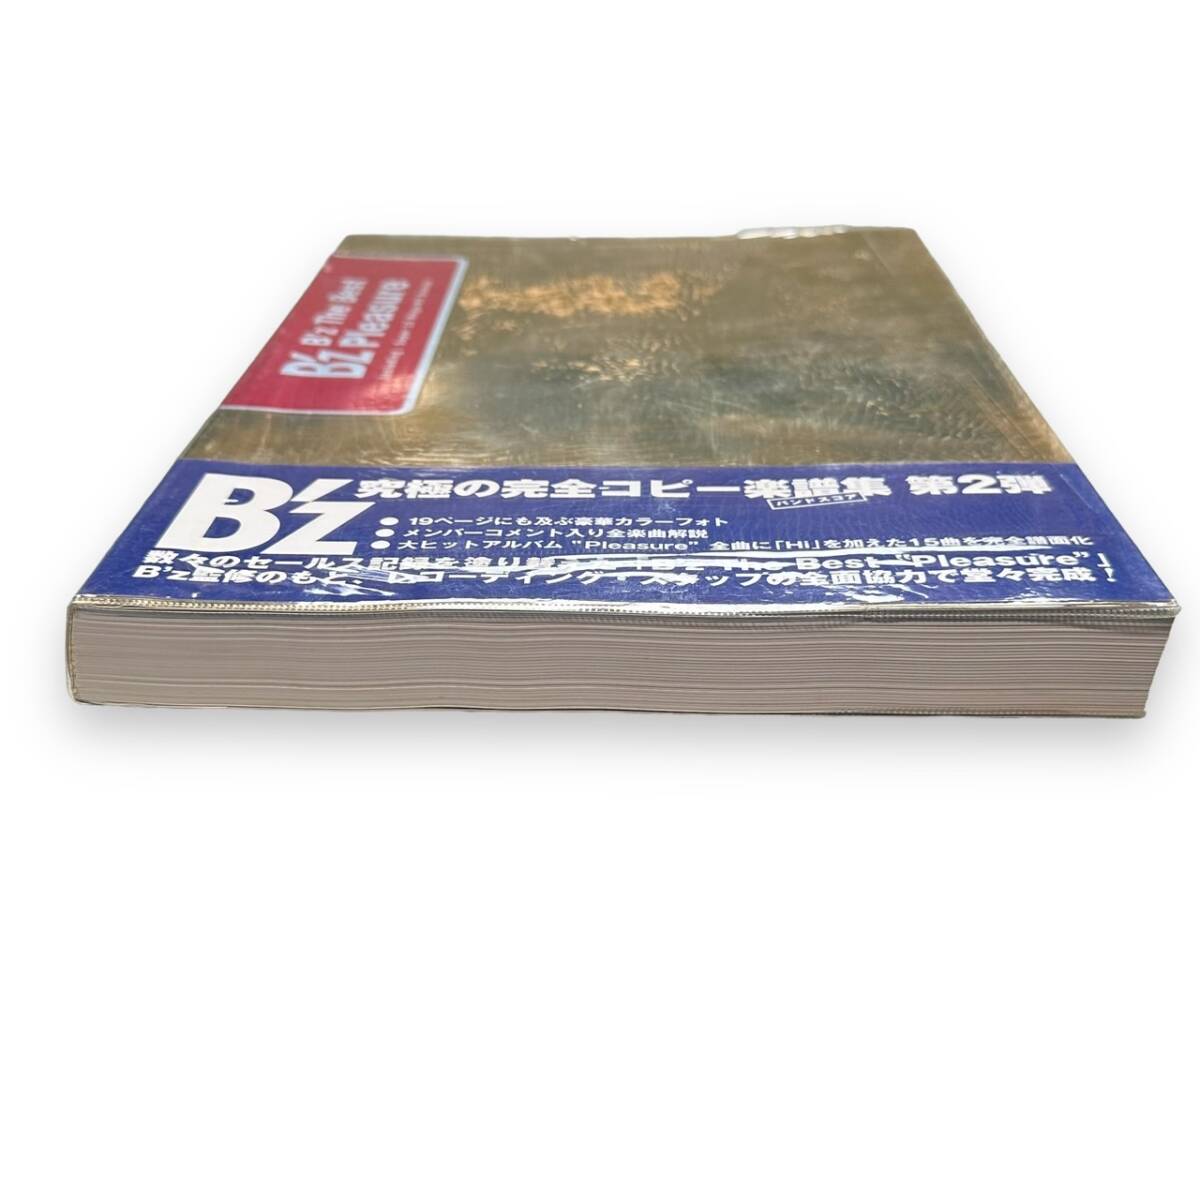 E-120[ out of print book@][B*z The Best B*z Treasure]Official Band Score 2 ultimate complete copy musical score compilation Band Score Inaba Koshi Matsumoto Takahiro 